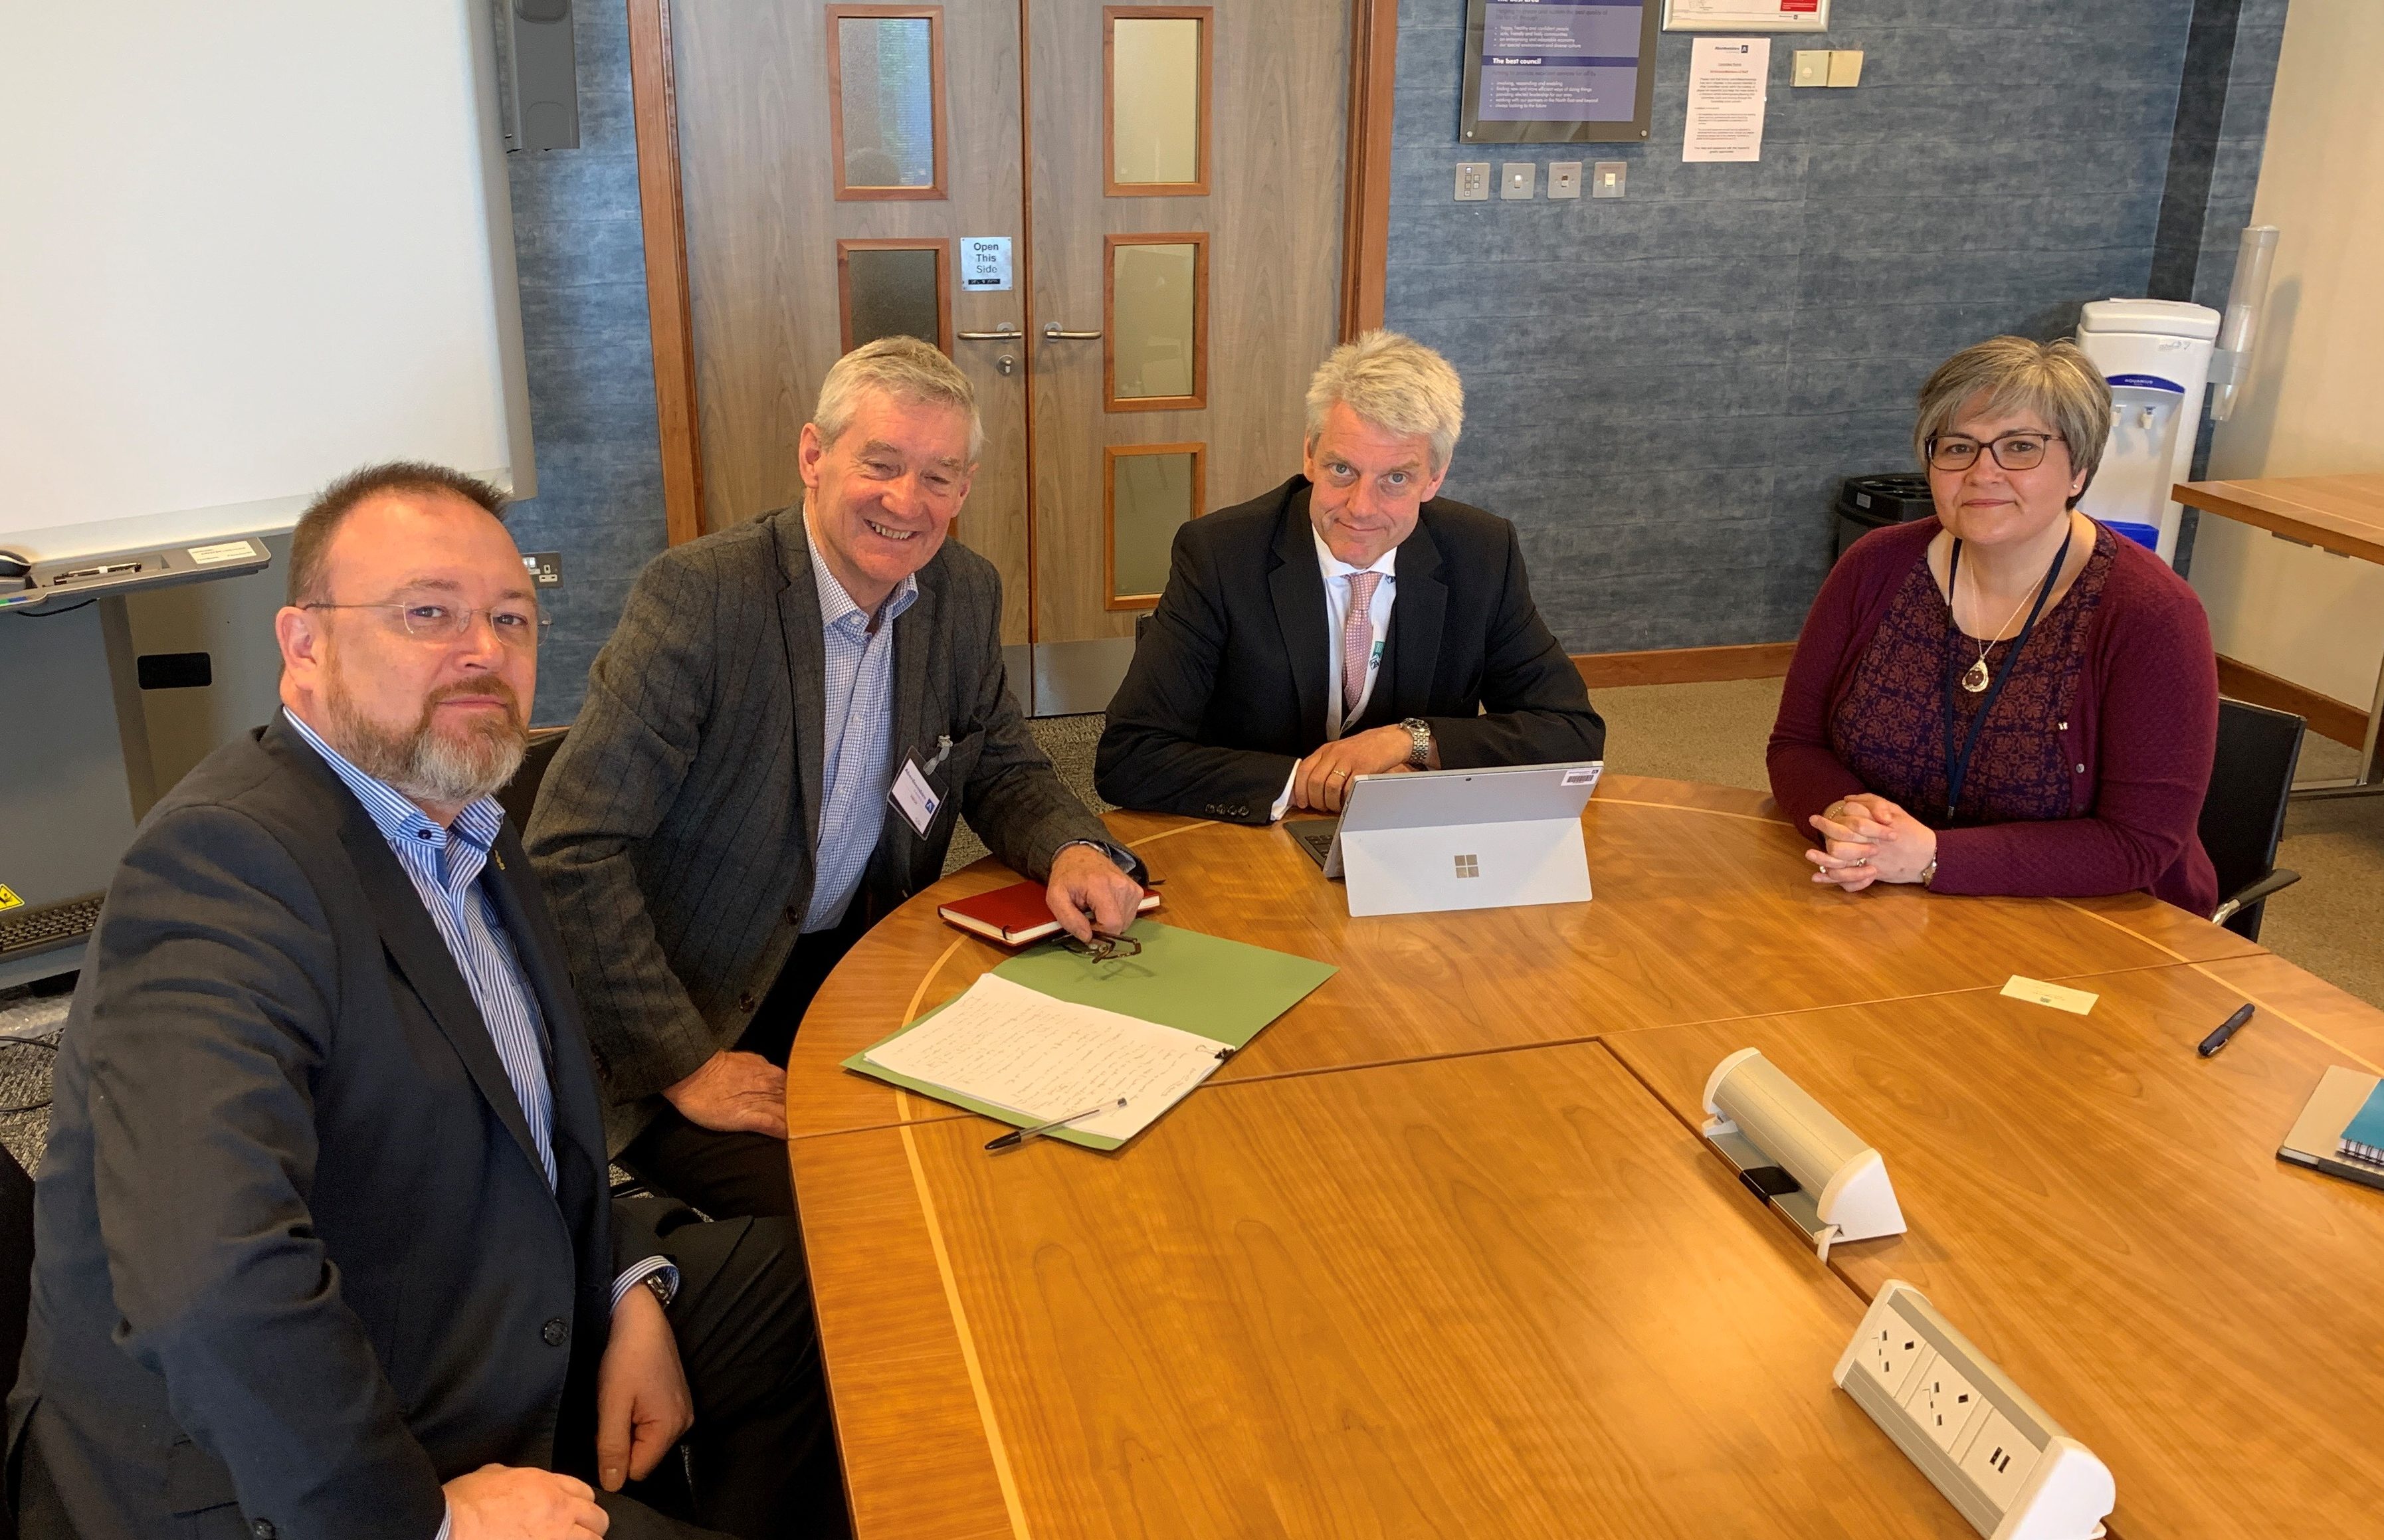 Left to right is MP David Duguid, MSP Peter Chapman, Aberdeenshire Health and Social Care Partnership chief officer Adam Coldwells and partnership manager Angie Wood having a meeting about the Minor Injury Unit Reviews